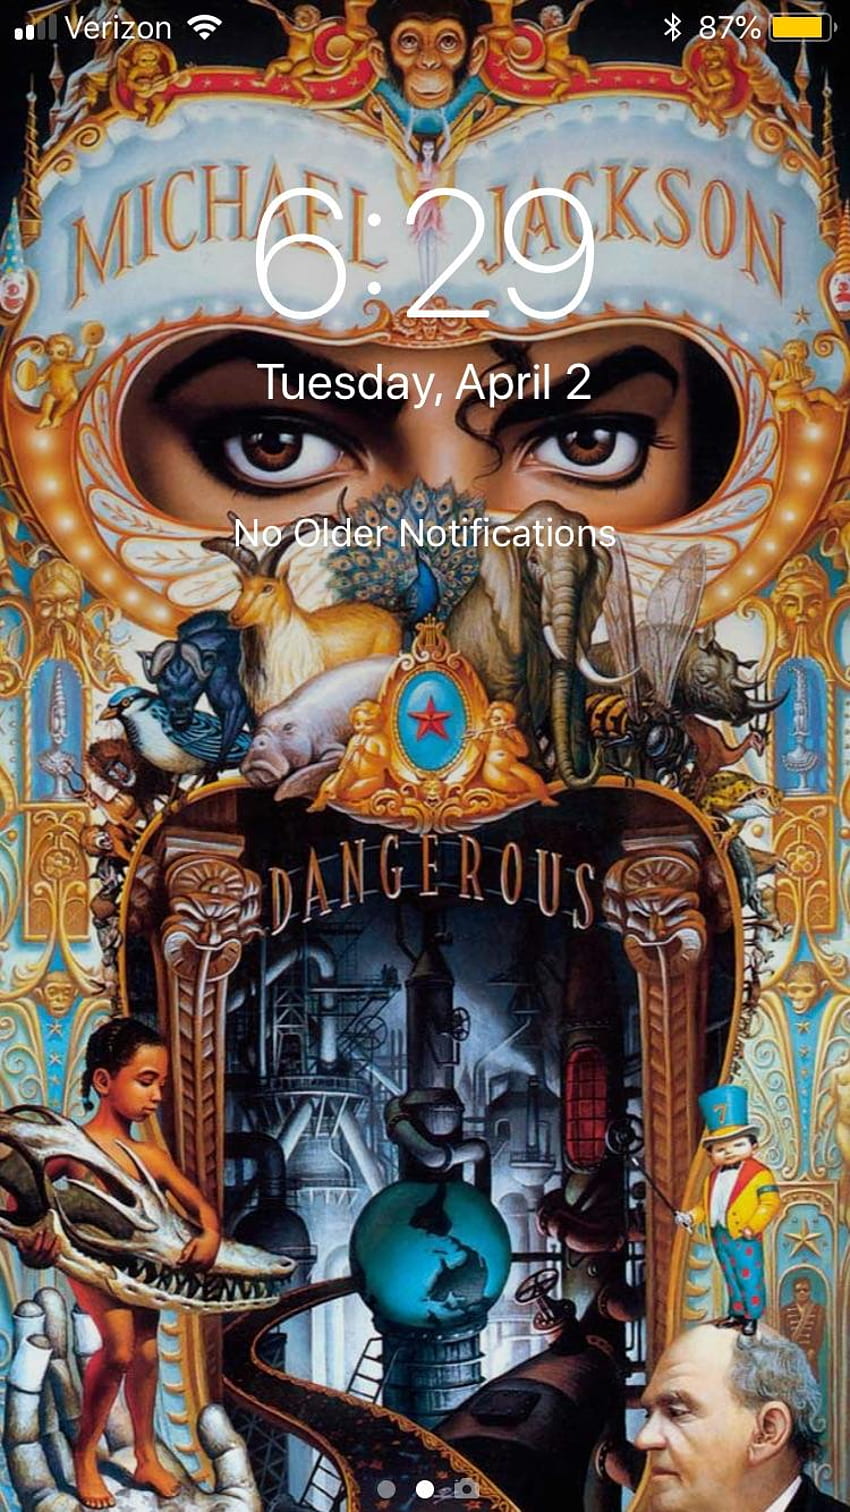 My phone after listening to the Dangerous album, Michael Jackson HD phone wallpaper